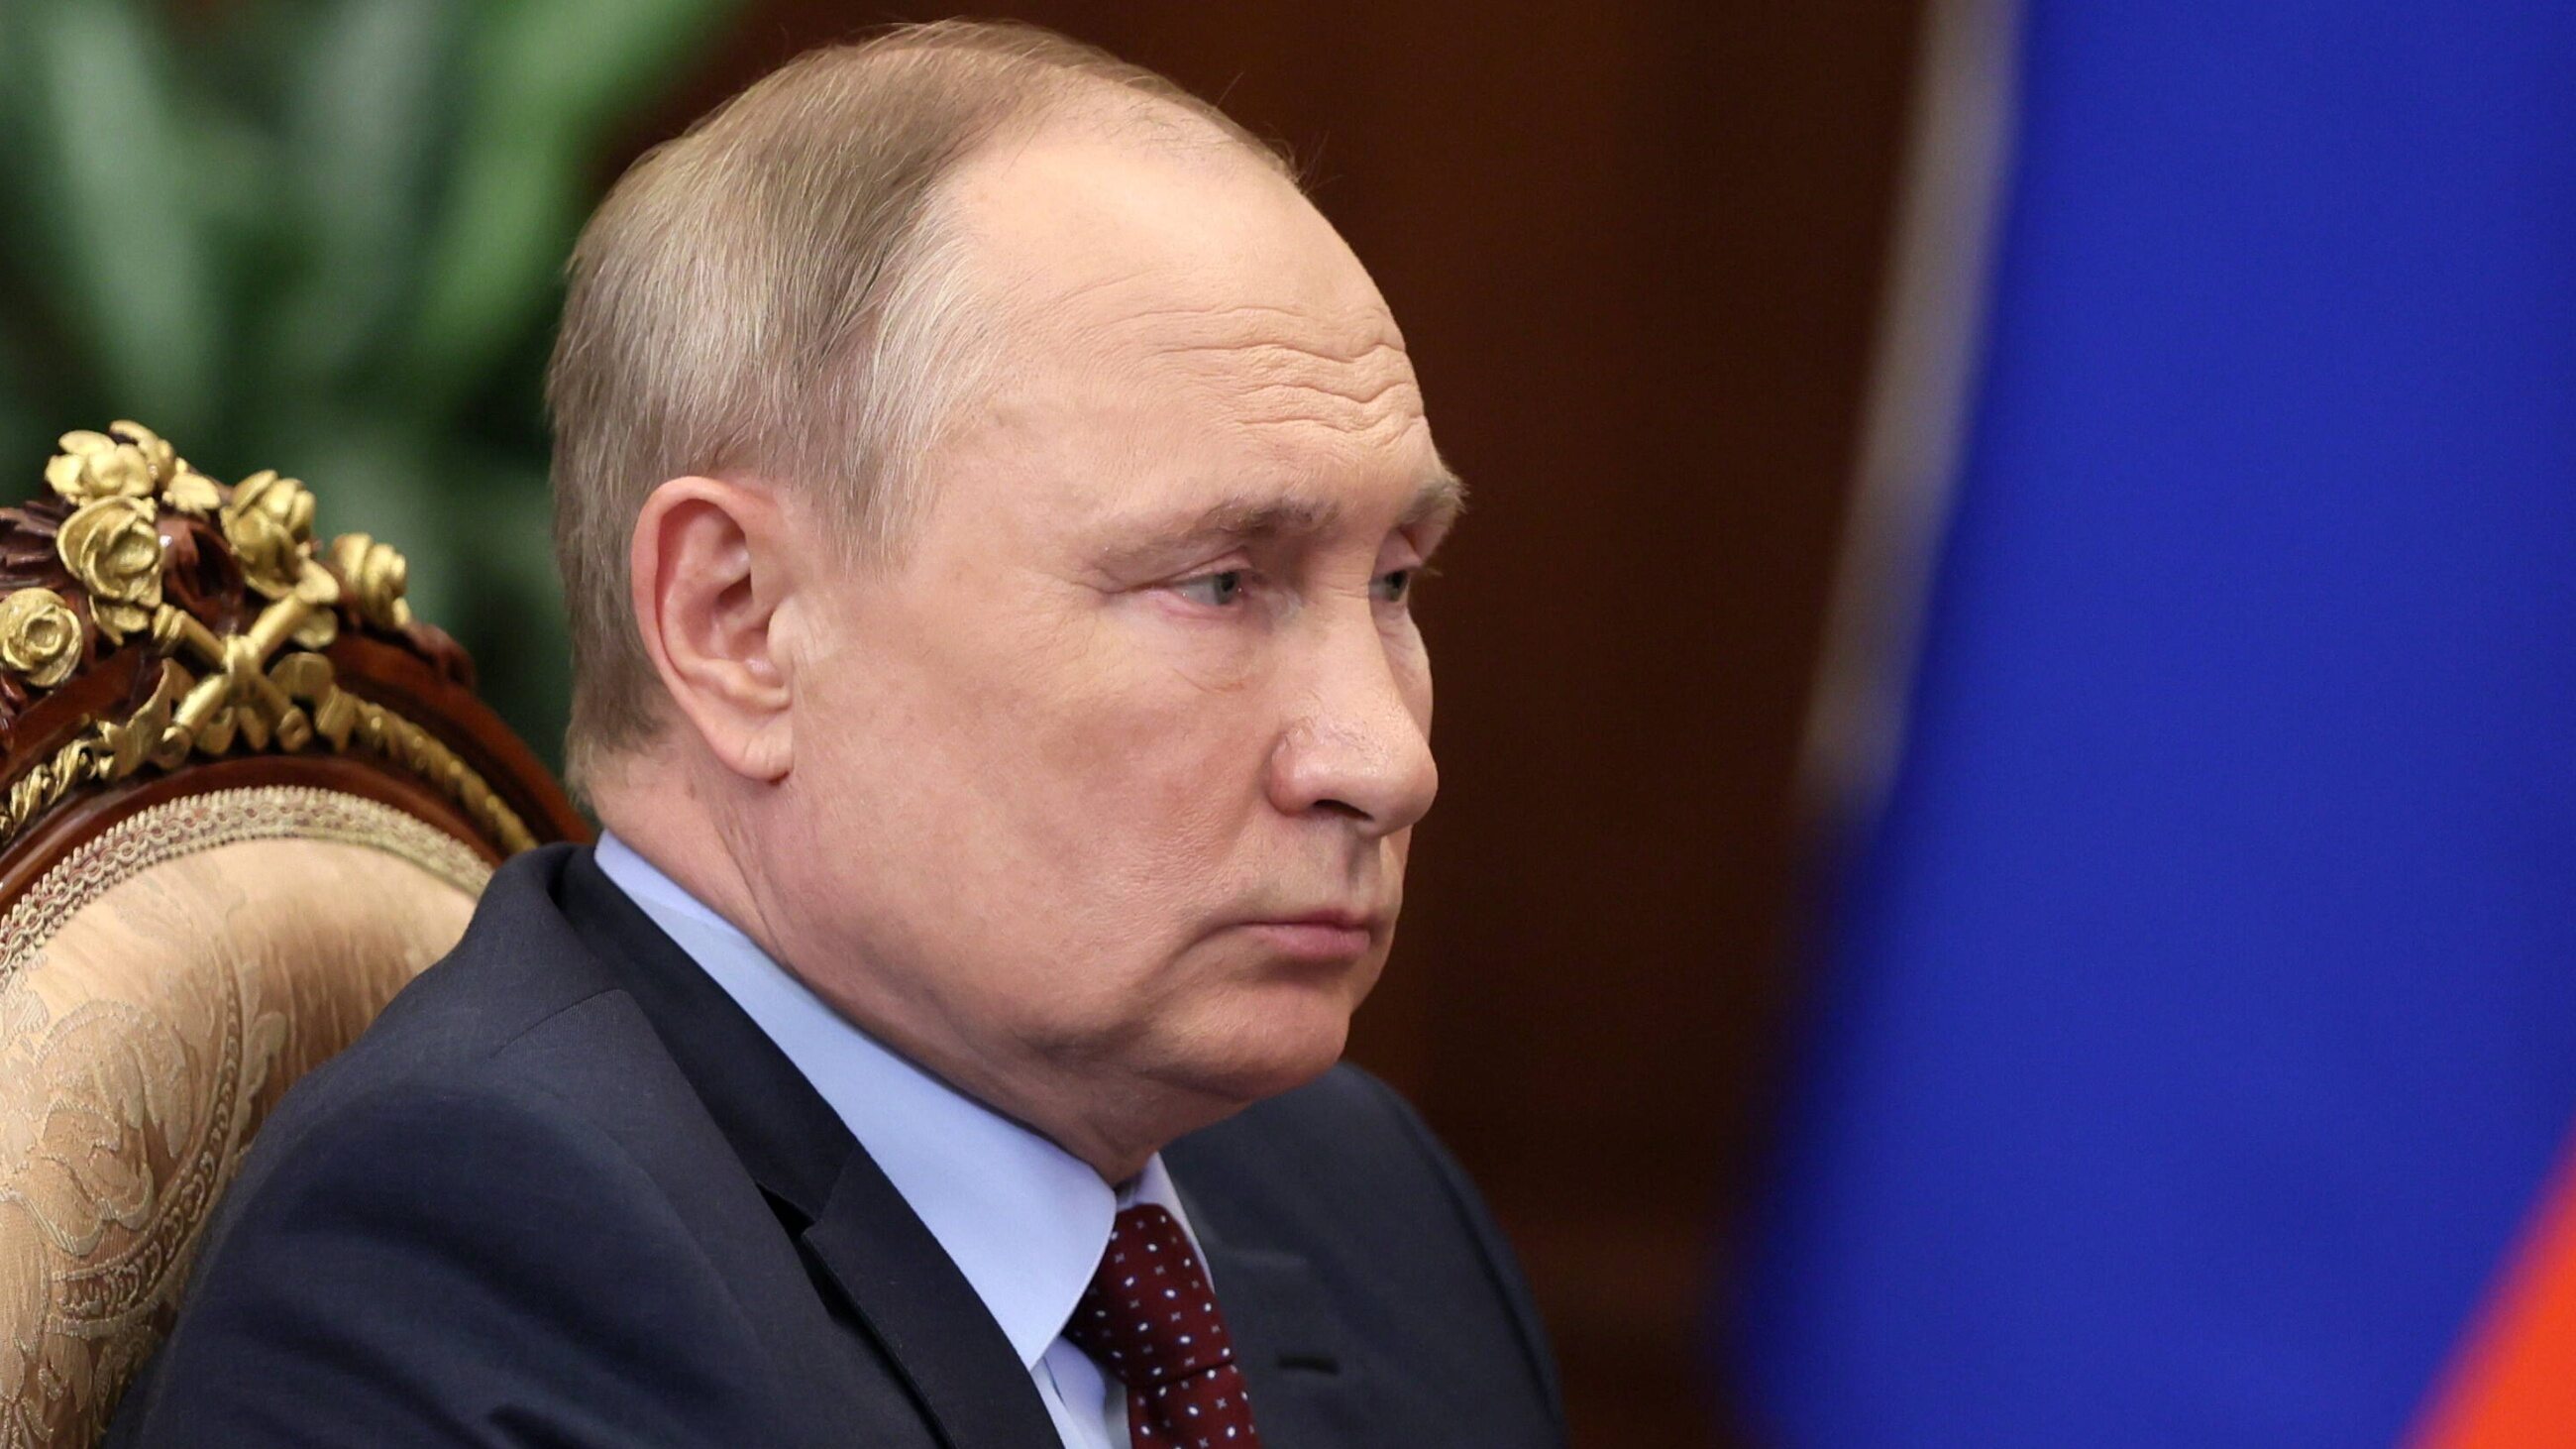 Putin has destroyed the market that Russia built 50 years ago